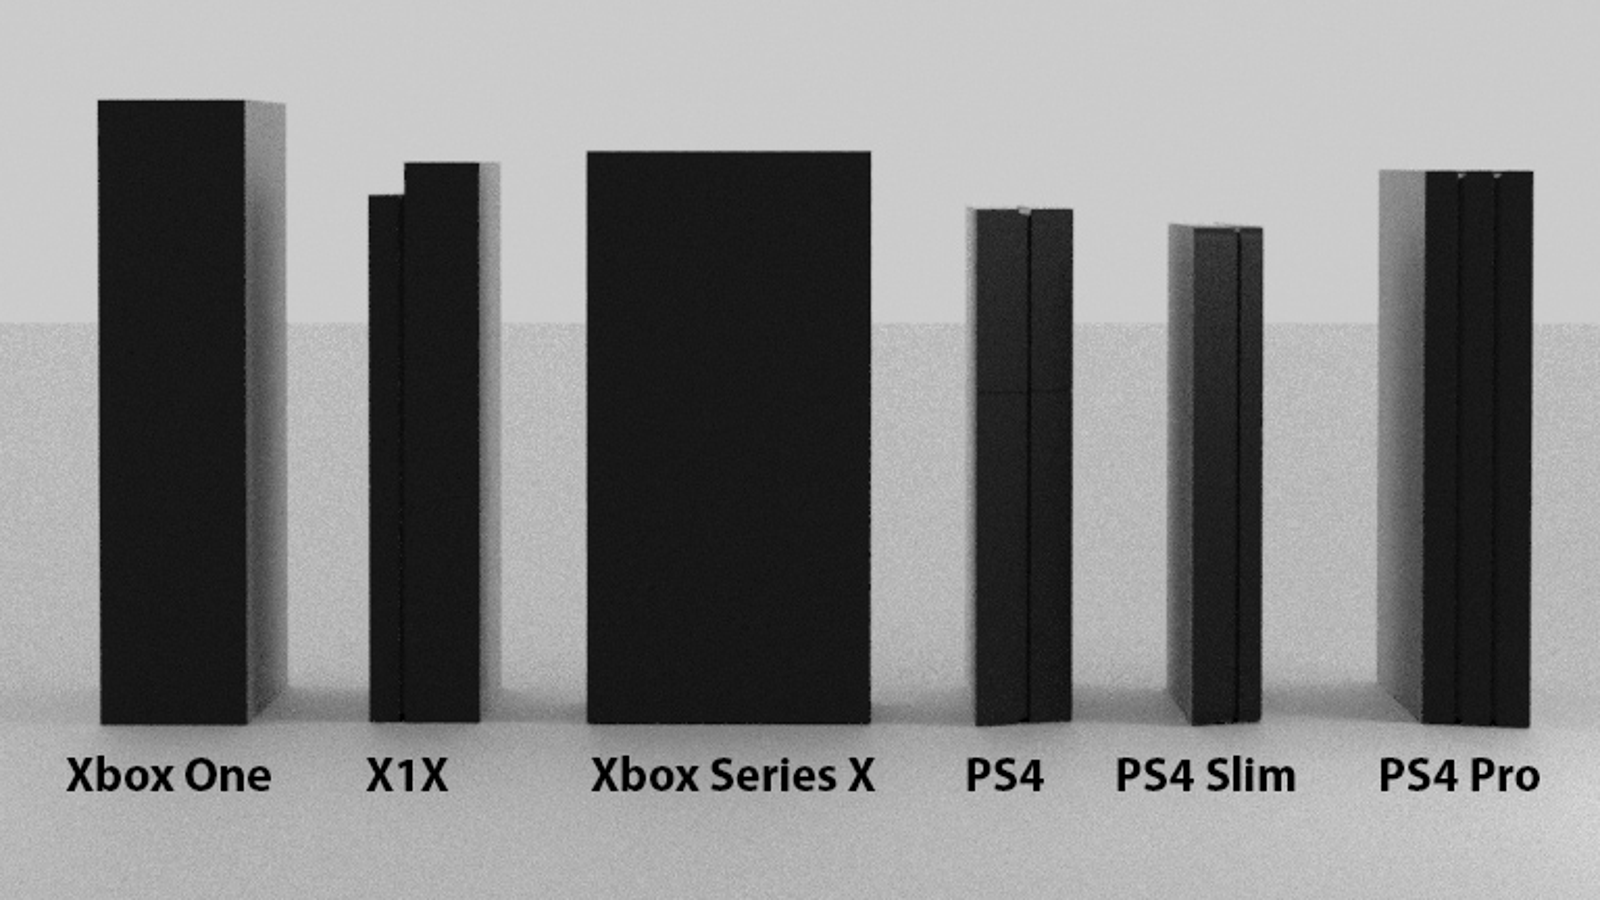 https://assetsio.gnwcdn.com/xbox-series-x-console-design-size-dimensions-ports-6400-1581354358708.jpg?width=1600&height=900&fit=crop&quality=100&format=png&enable=upscale&auto=webp